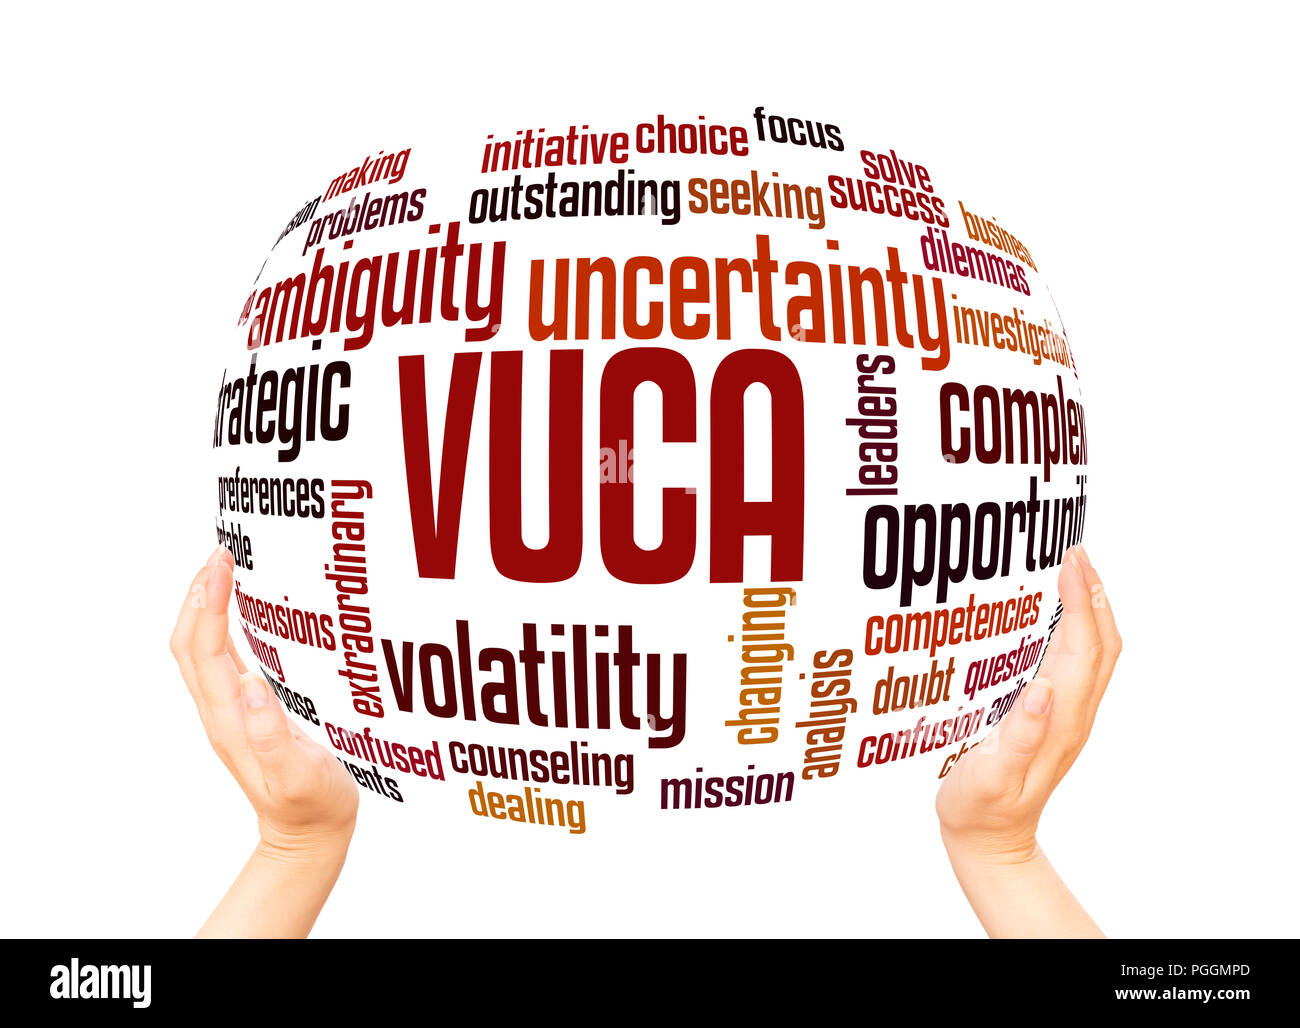 VUCA word cloud sphere concept on white background. VUCA is an acronym used to describe or reflect on the volatility, uncertainty, complexity and ambi Stock Photo